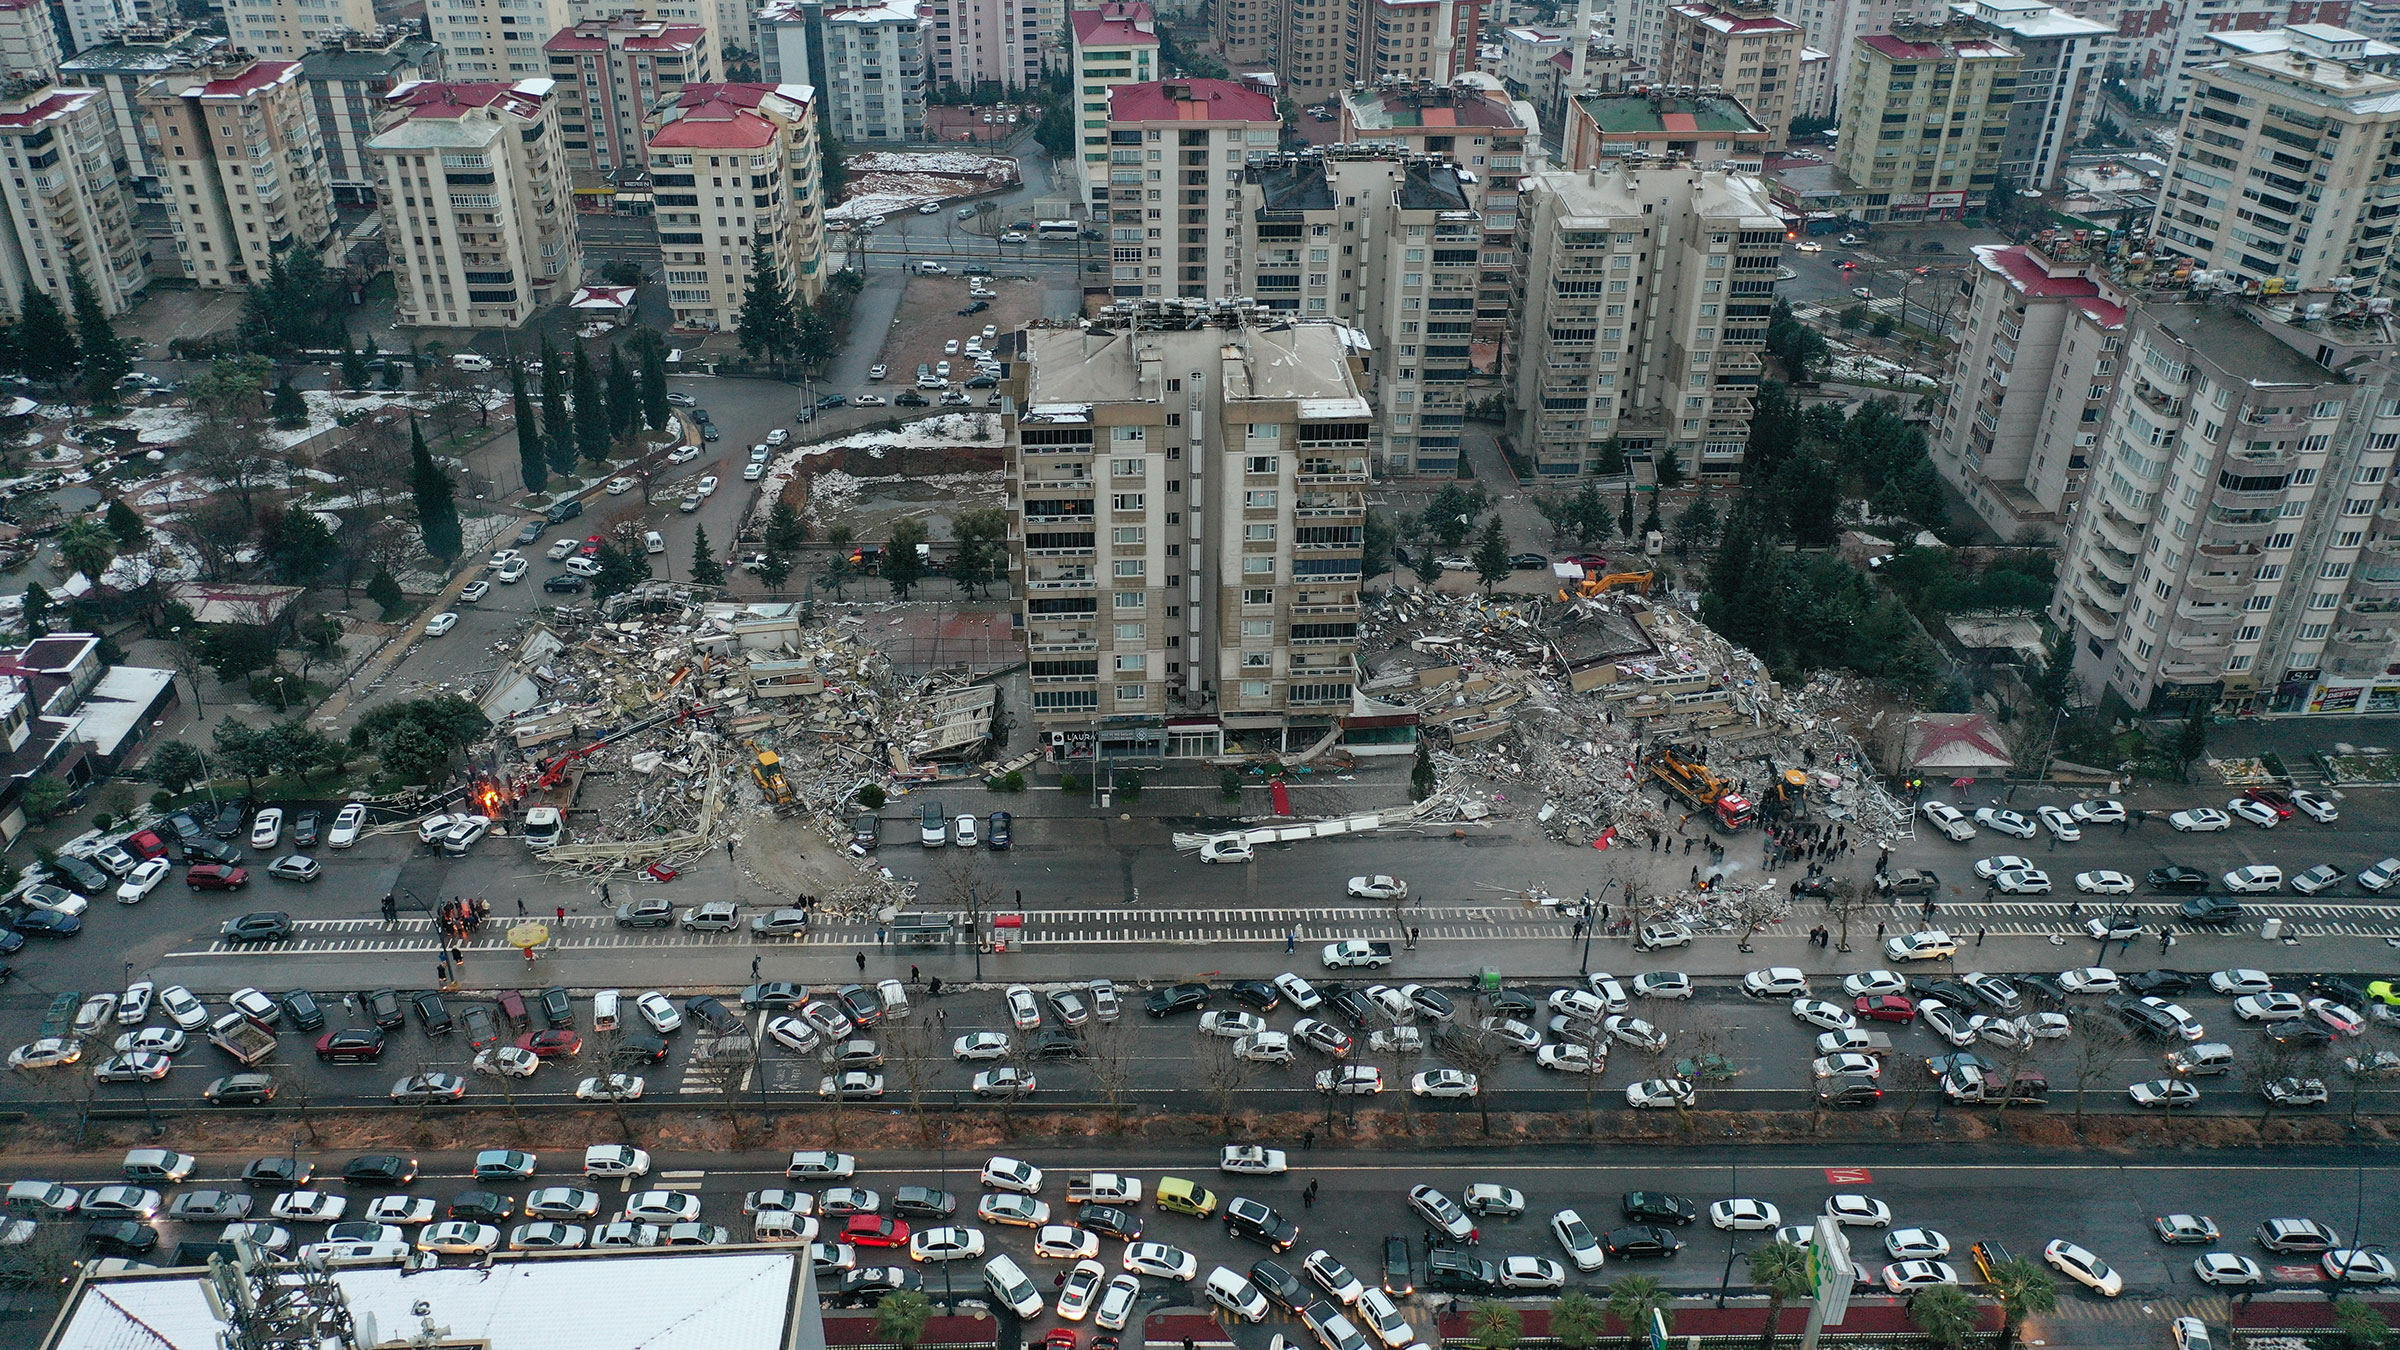 An aerial view shows search and rescue operations continue at a collapsed 15 story building after 7.7 and 7.6 magnitude earthquakes hit Kahramanmaras, on Feb. 6, 2023. (Halife Yalcinkaya—Anadolu Agency via Getty Images)